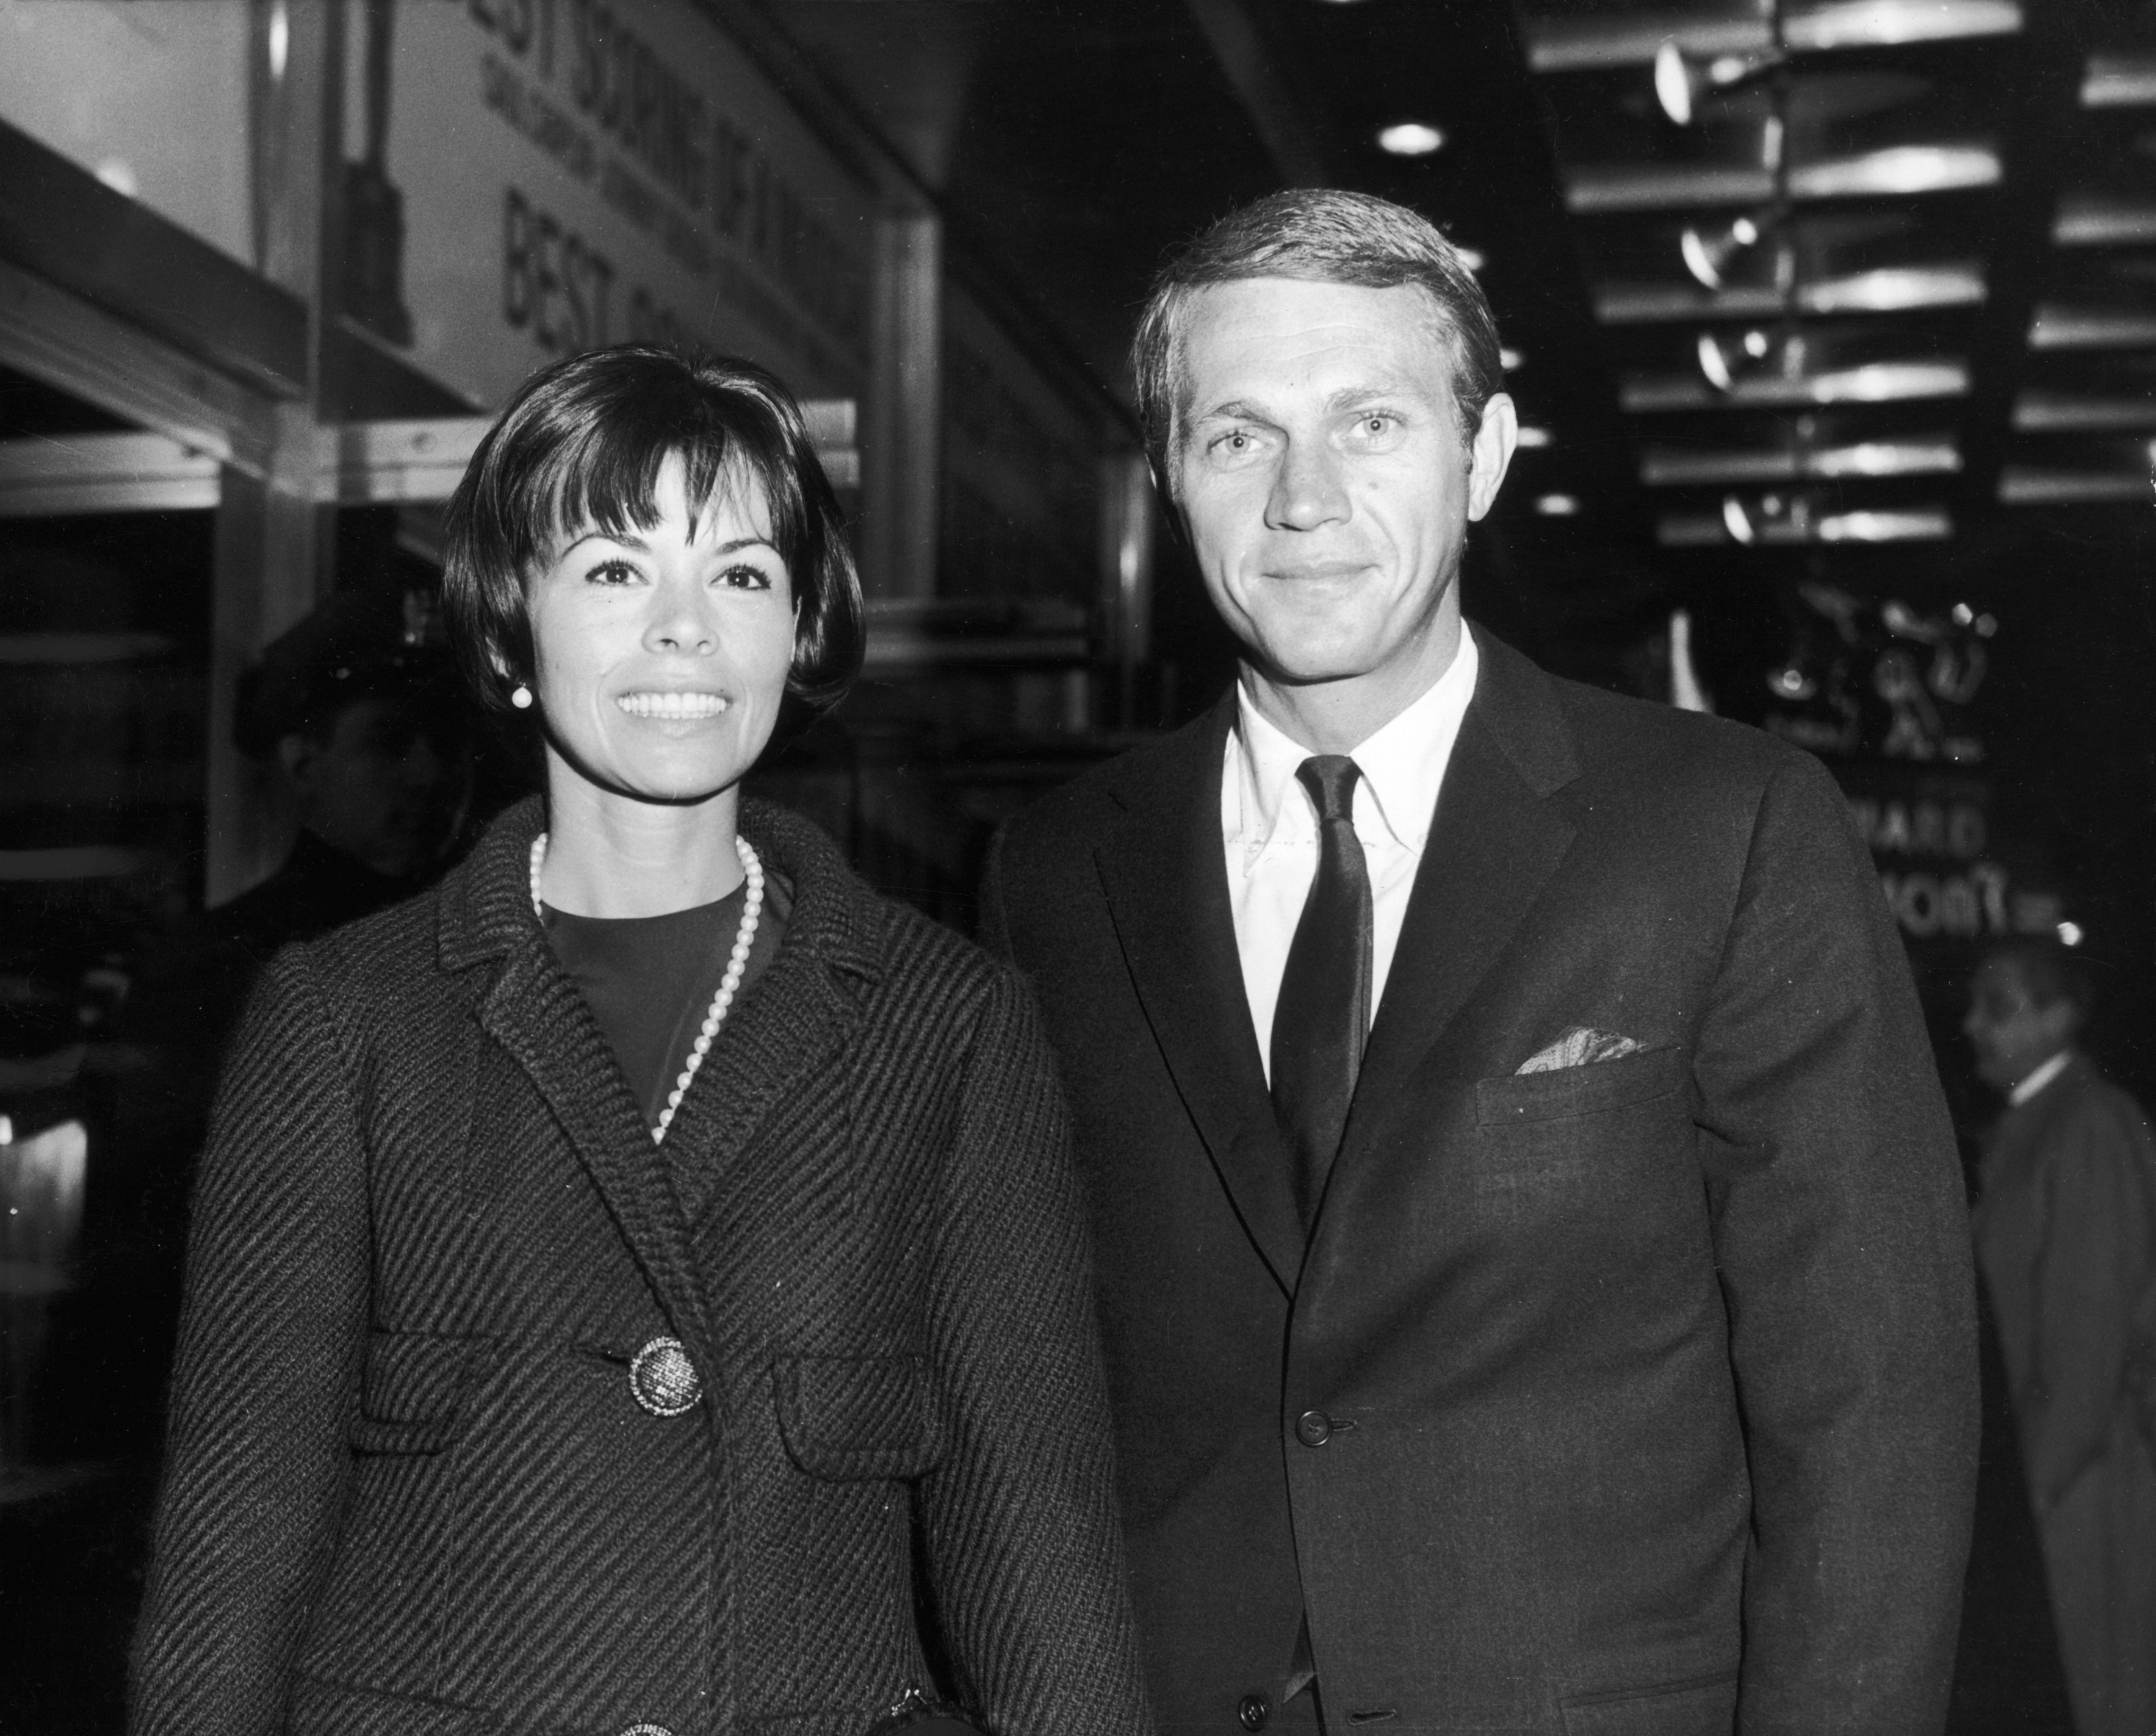 Steve McQueen and Neile Adams attending a Broadway play in 1965 in New York City┃Source: Getty Images